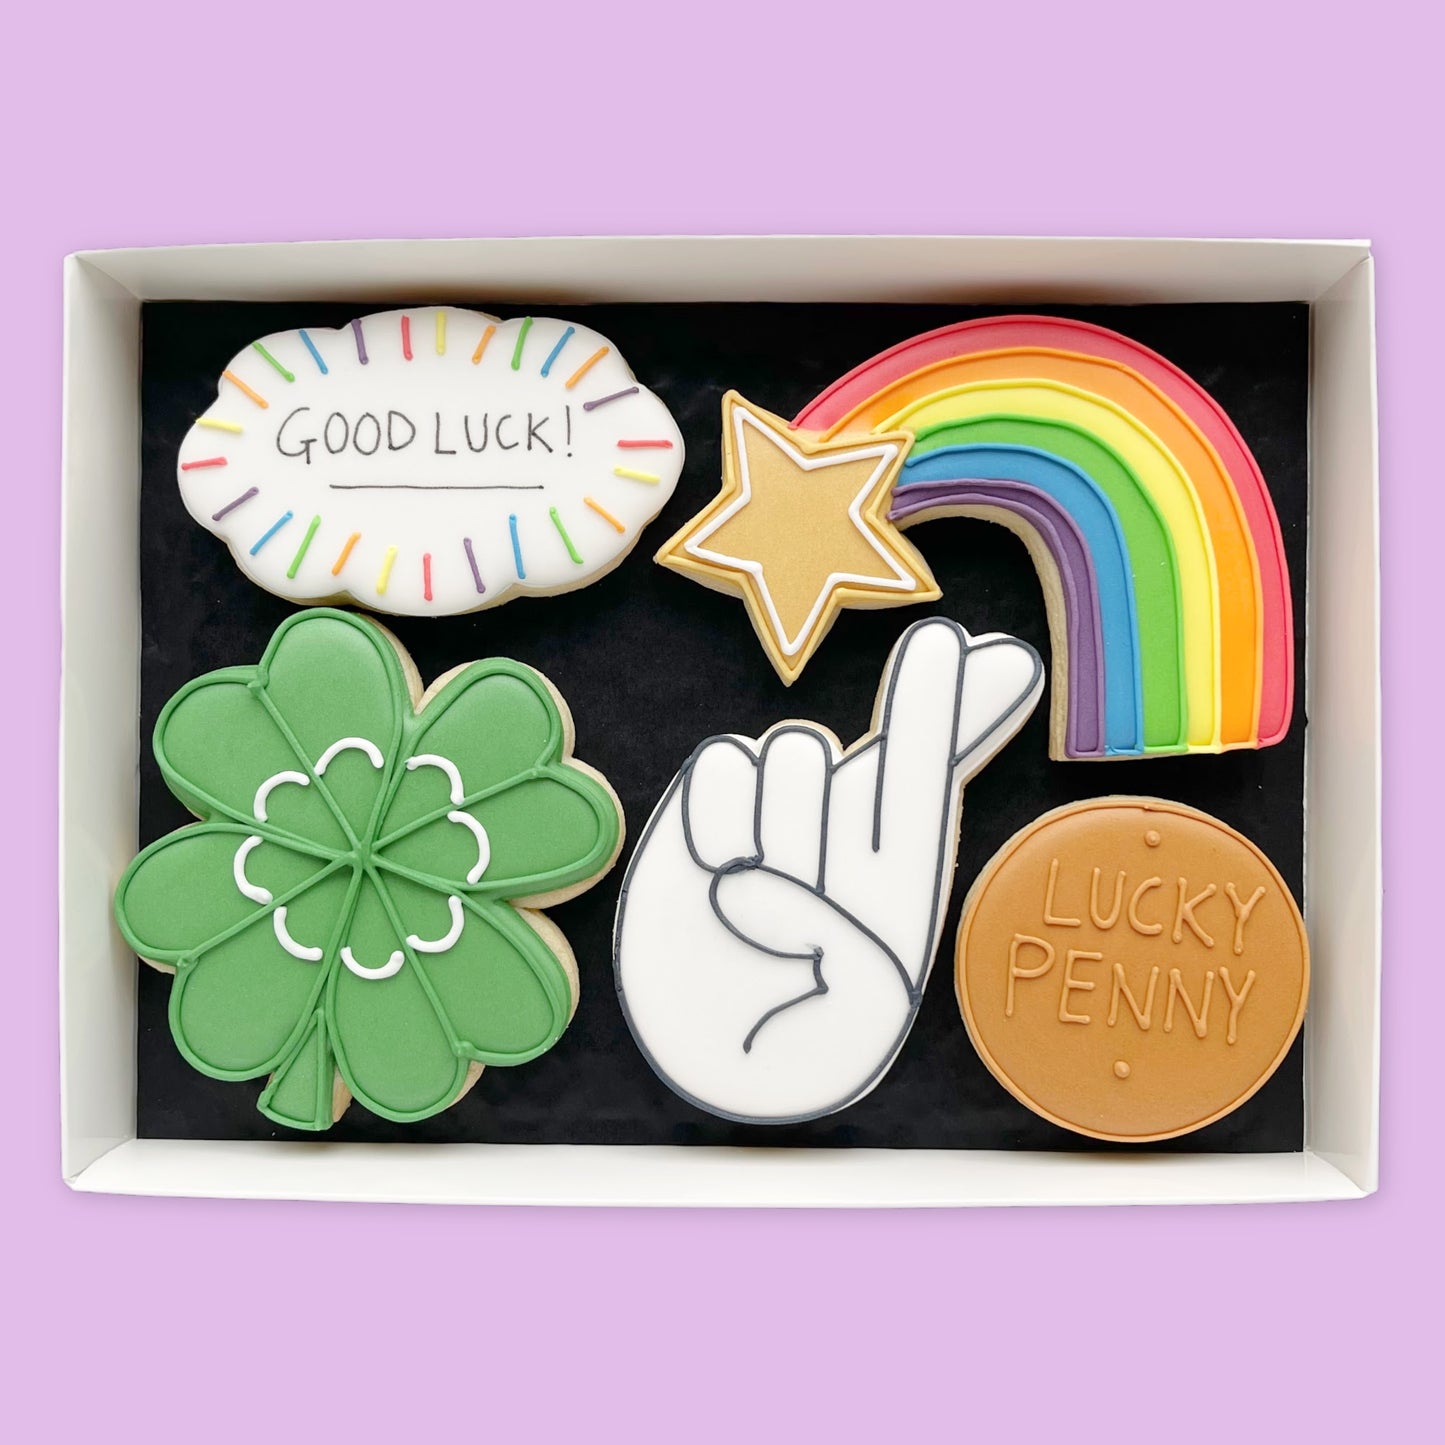 Hand iced Good luck themed biscuits in an open white gift box by Katie's Biscuit shop 